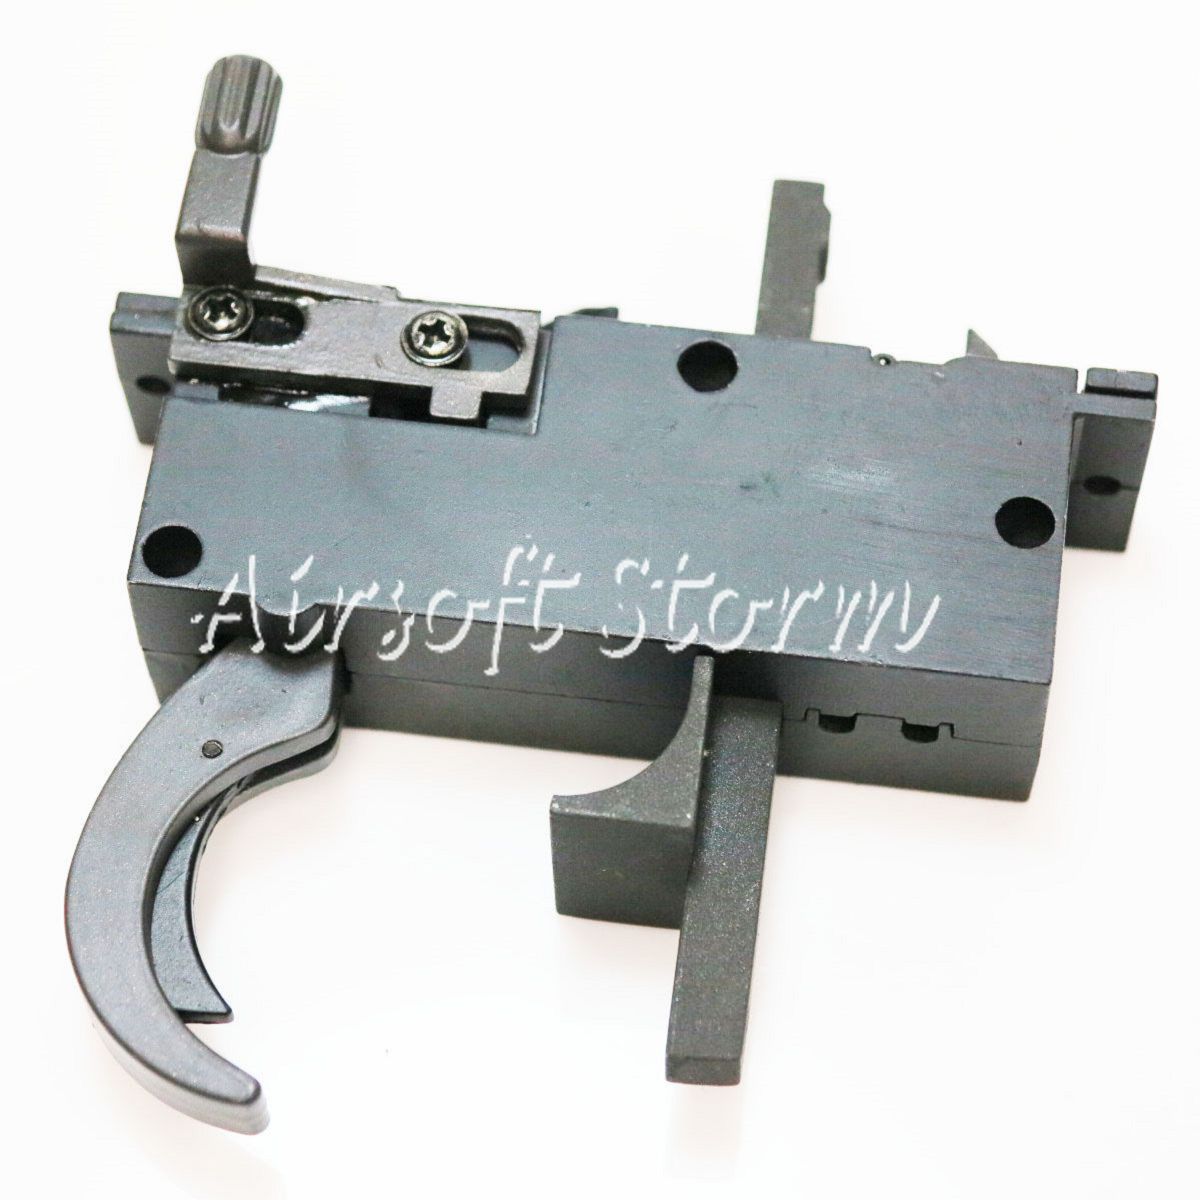 AEG Gear WELL MB01 Metal Trigger Assembly for L96 Type Airsoft Sniper - Click Image to Close